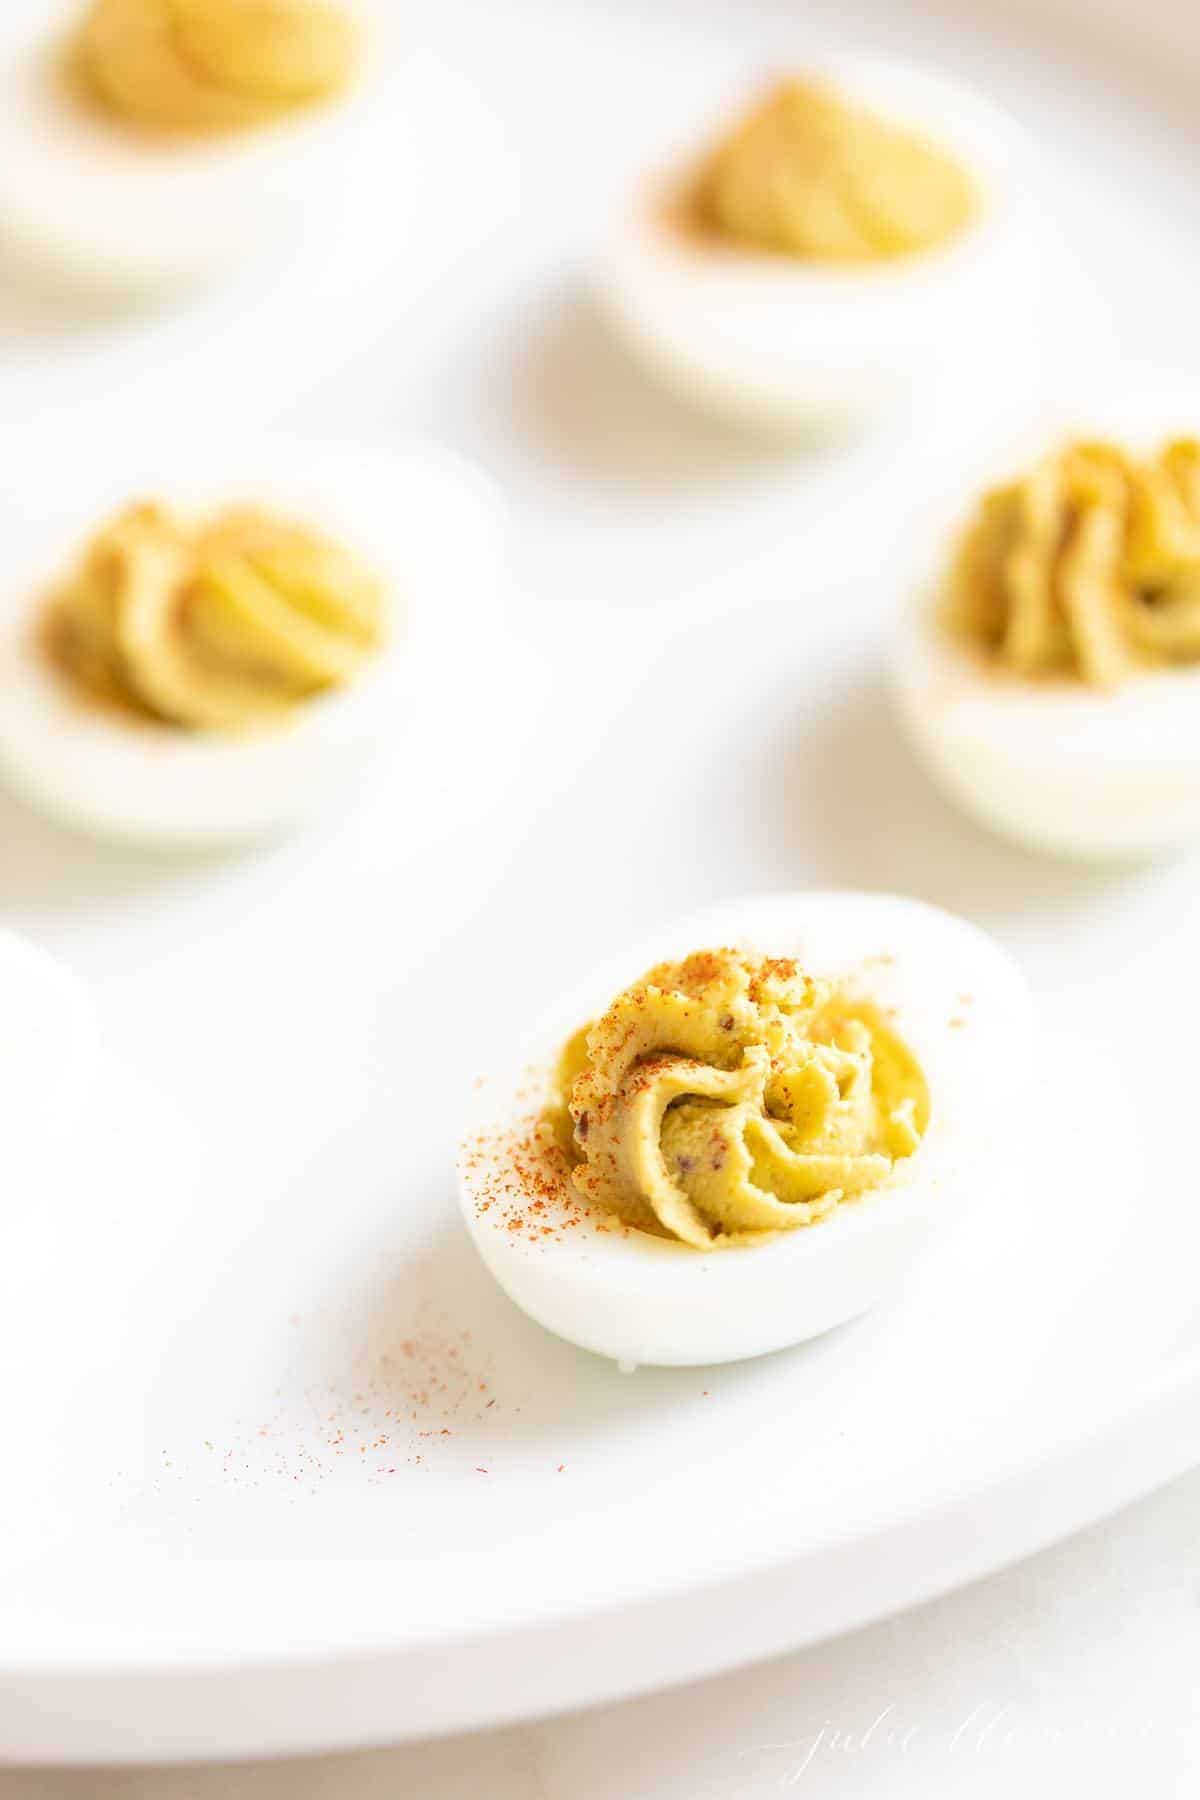 avocado deviled eggs on a white plate for a healthy appetizer